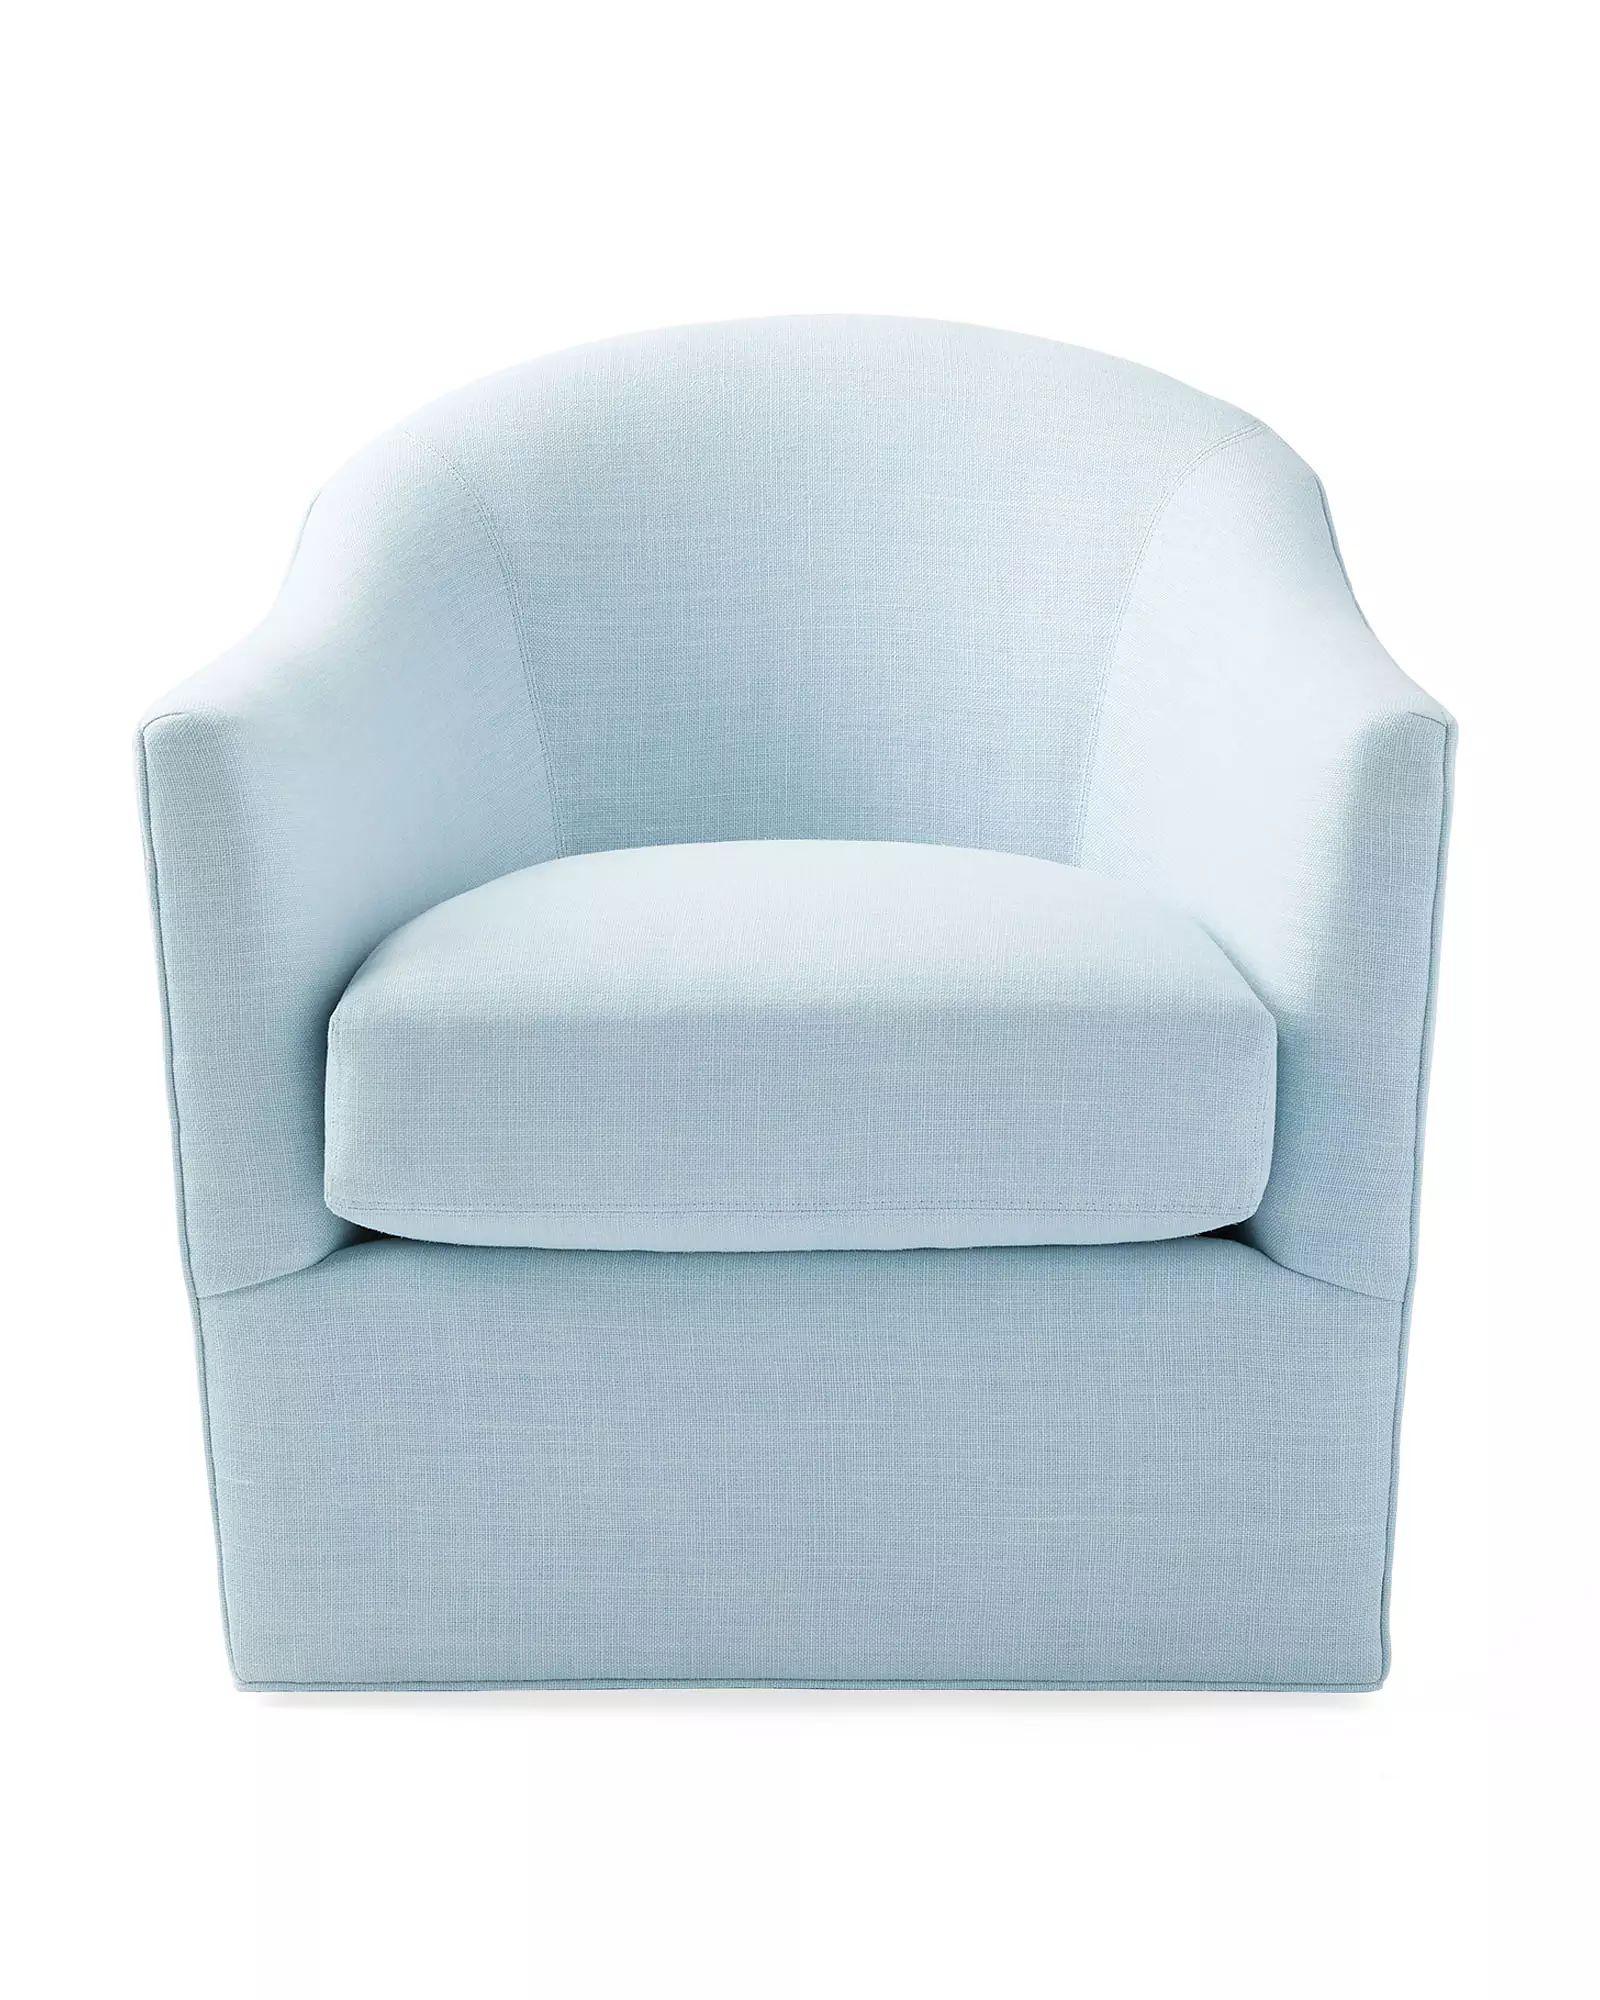 Provence Swivel Chair in Washed Linen Sky | Serena and Lily